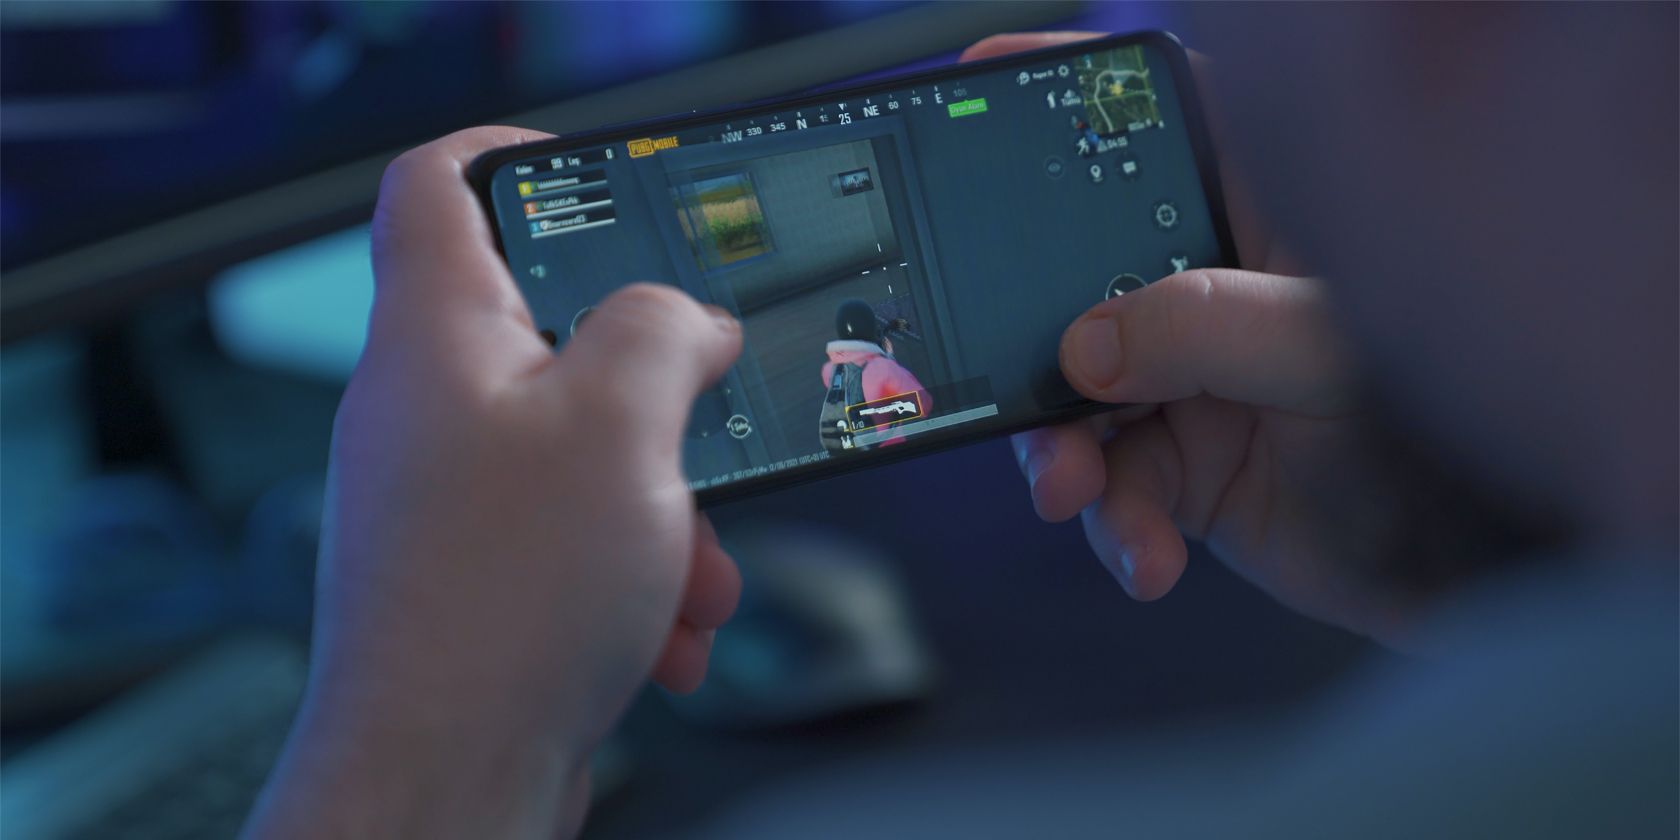 gaming on a smartphone